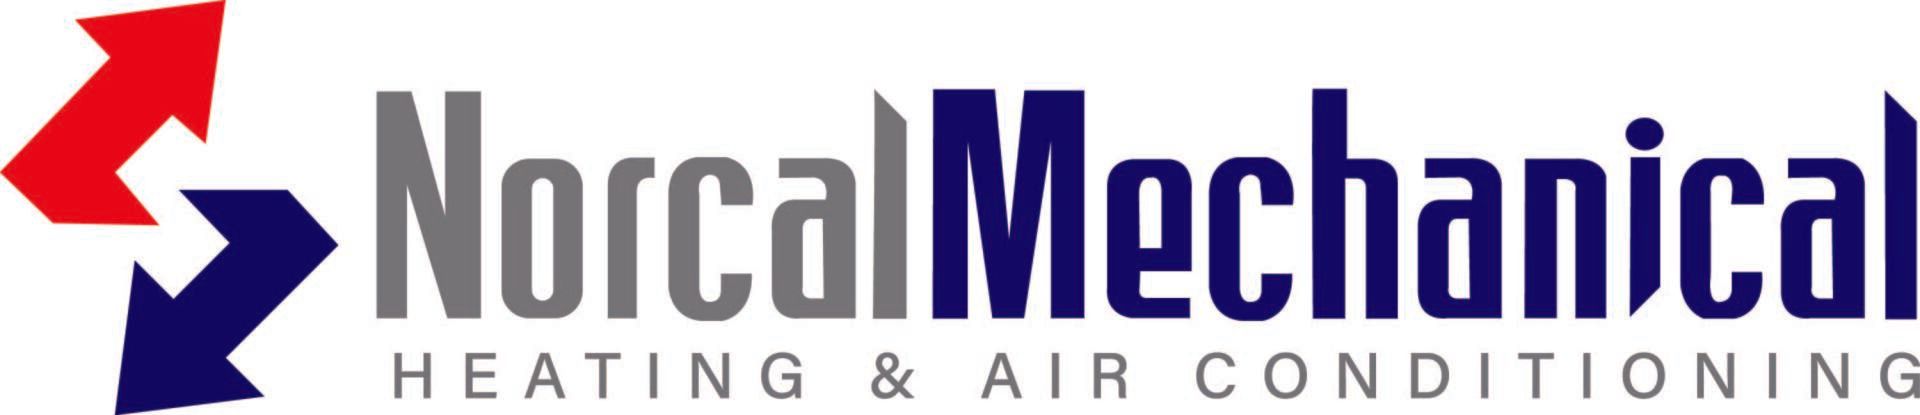 Norcal Mechanical Heating & Air Conditioning